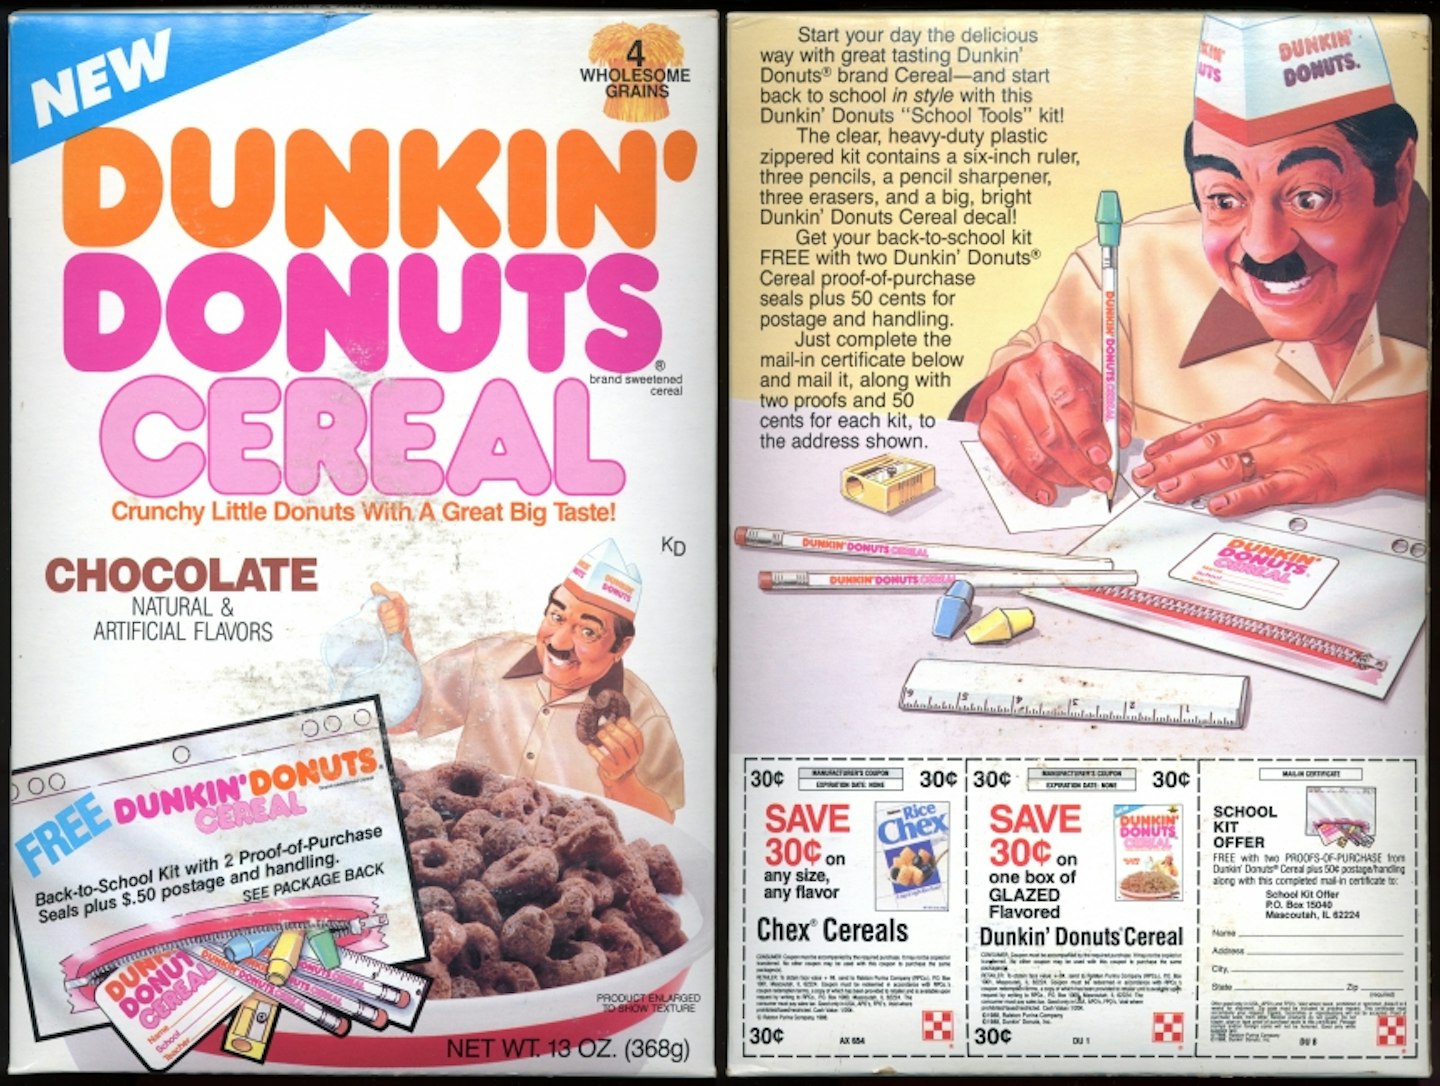 Discontinued cereals Dunkin' Donuts Cereal